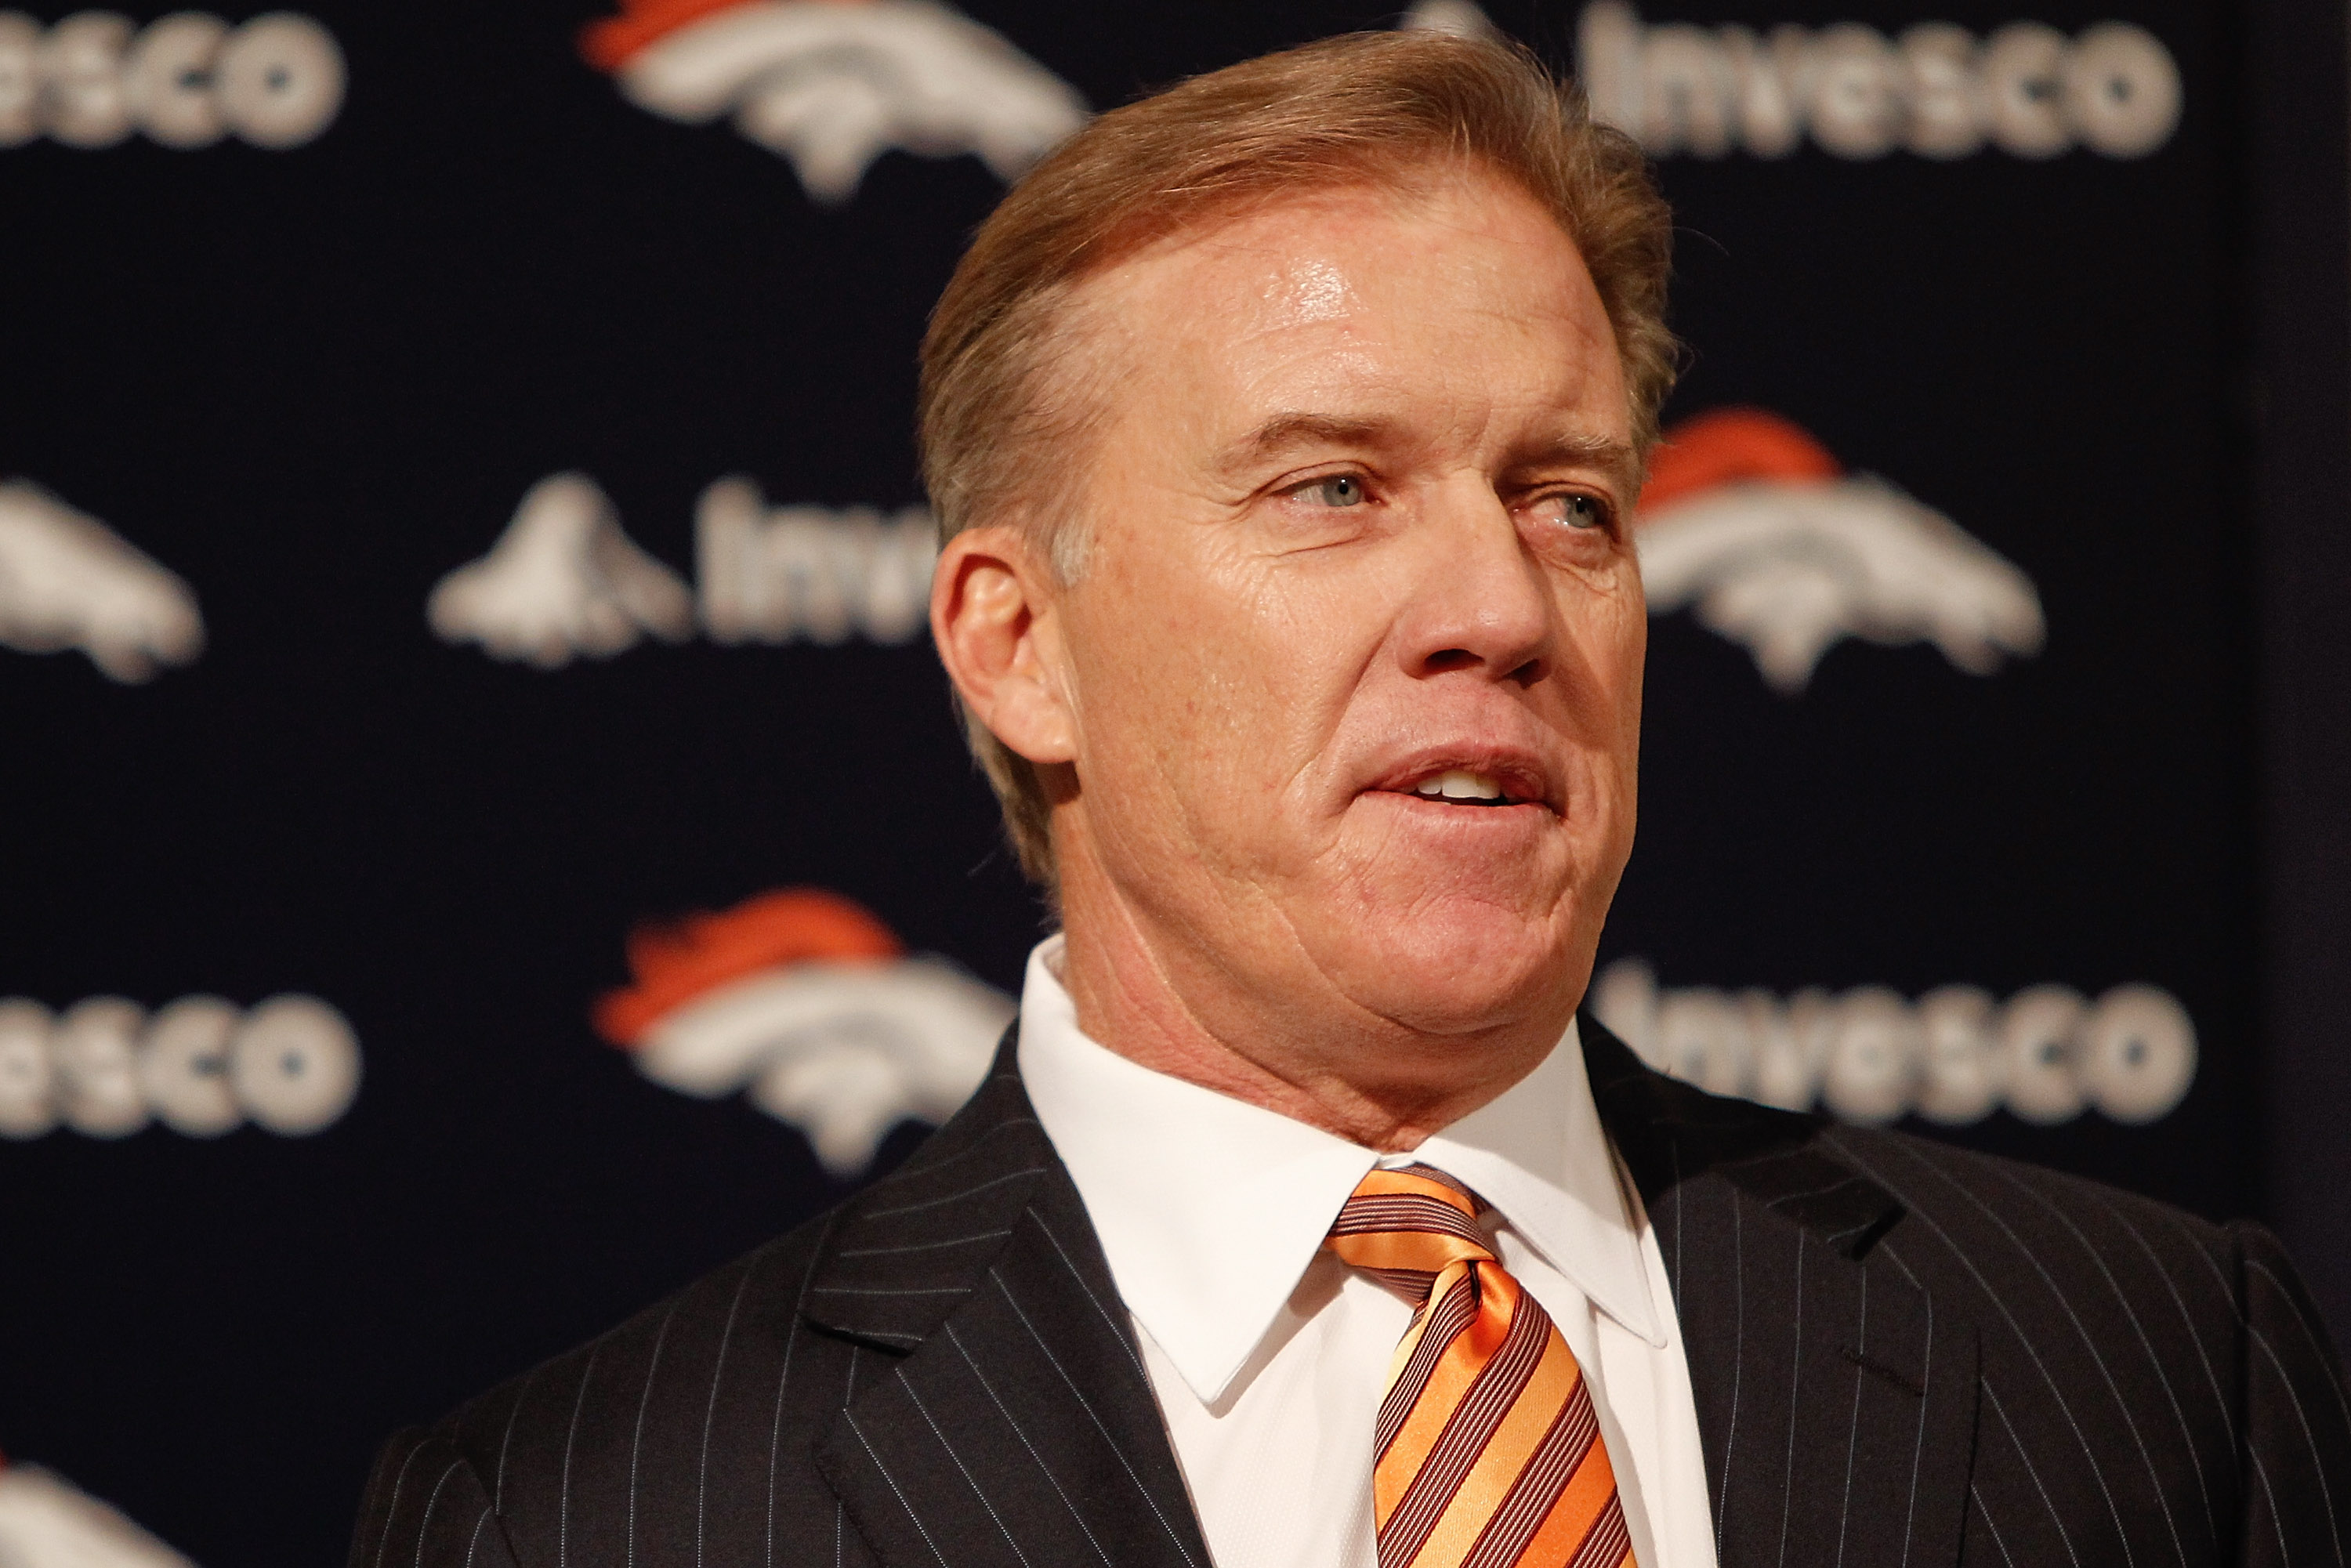 ENGLEWOOD, CO - JANUARY 14:  Denver Broncos vice president of football operations John Elway addresses the media during a press conference to announce John Fox as the next head coach at Dove Valley on January 14, 2011 in Englewood, Colorado. Fox was named